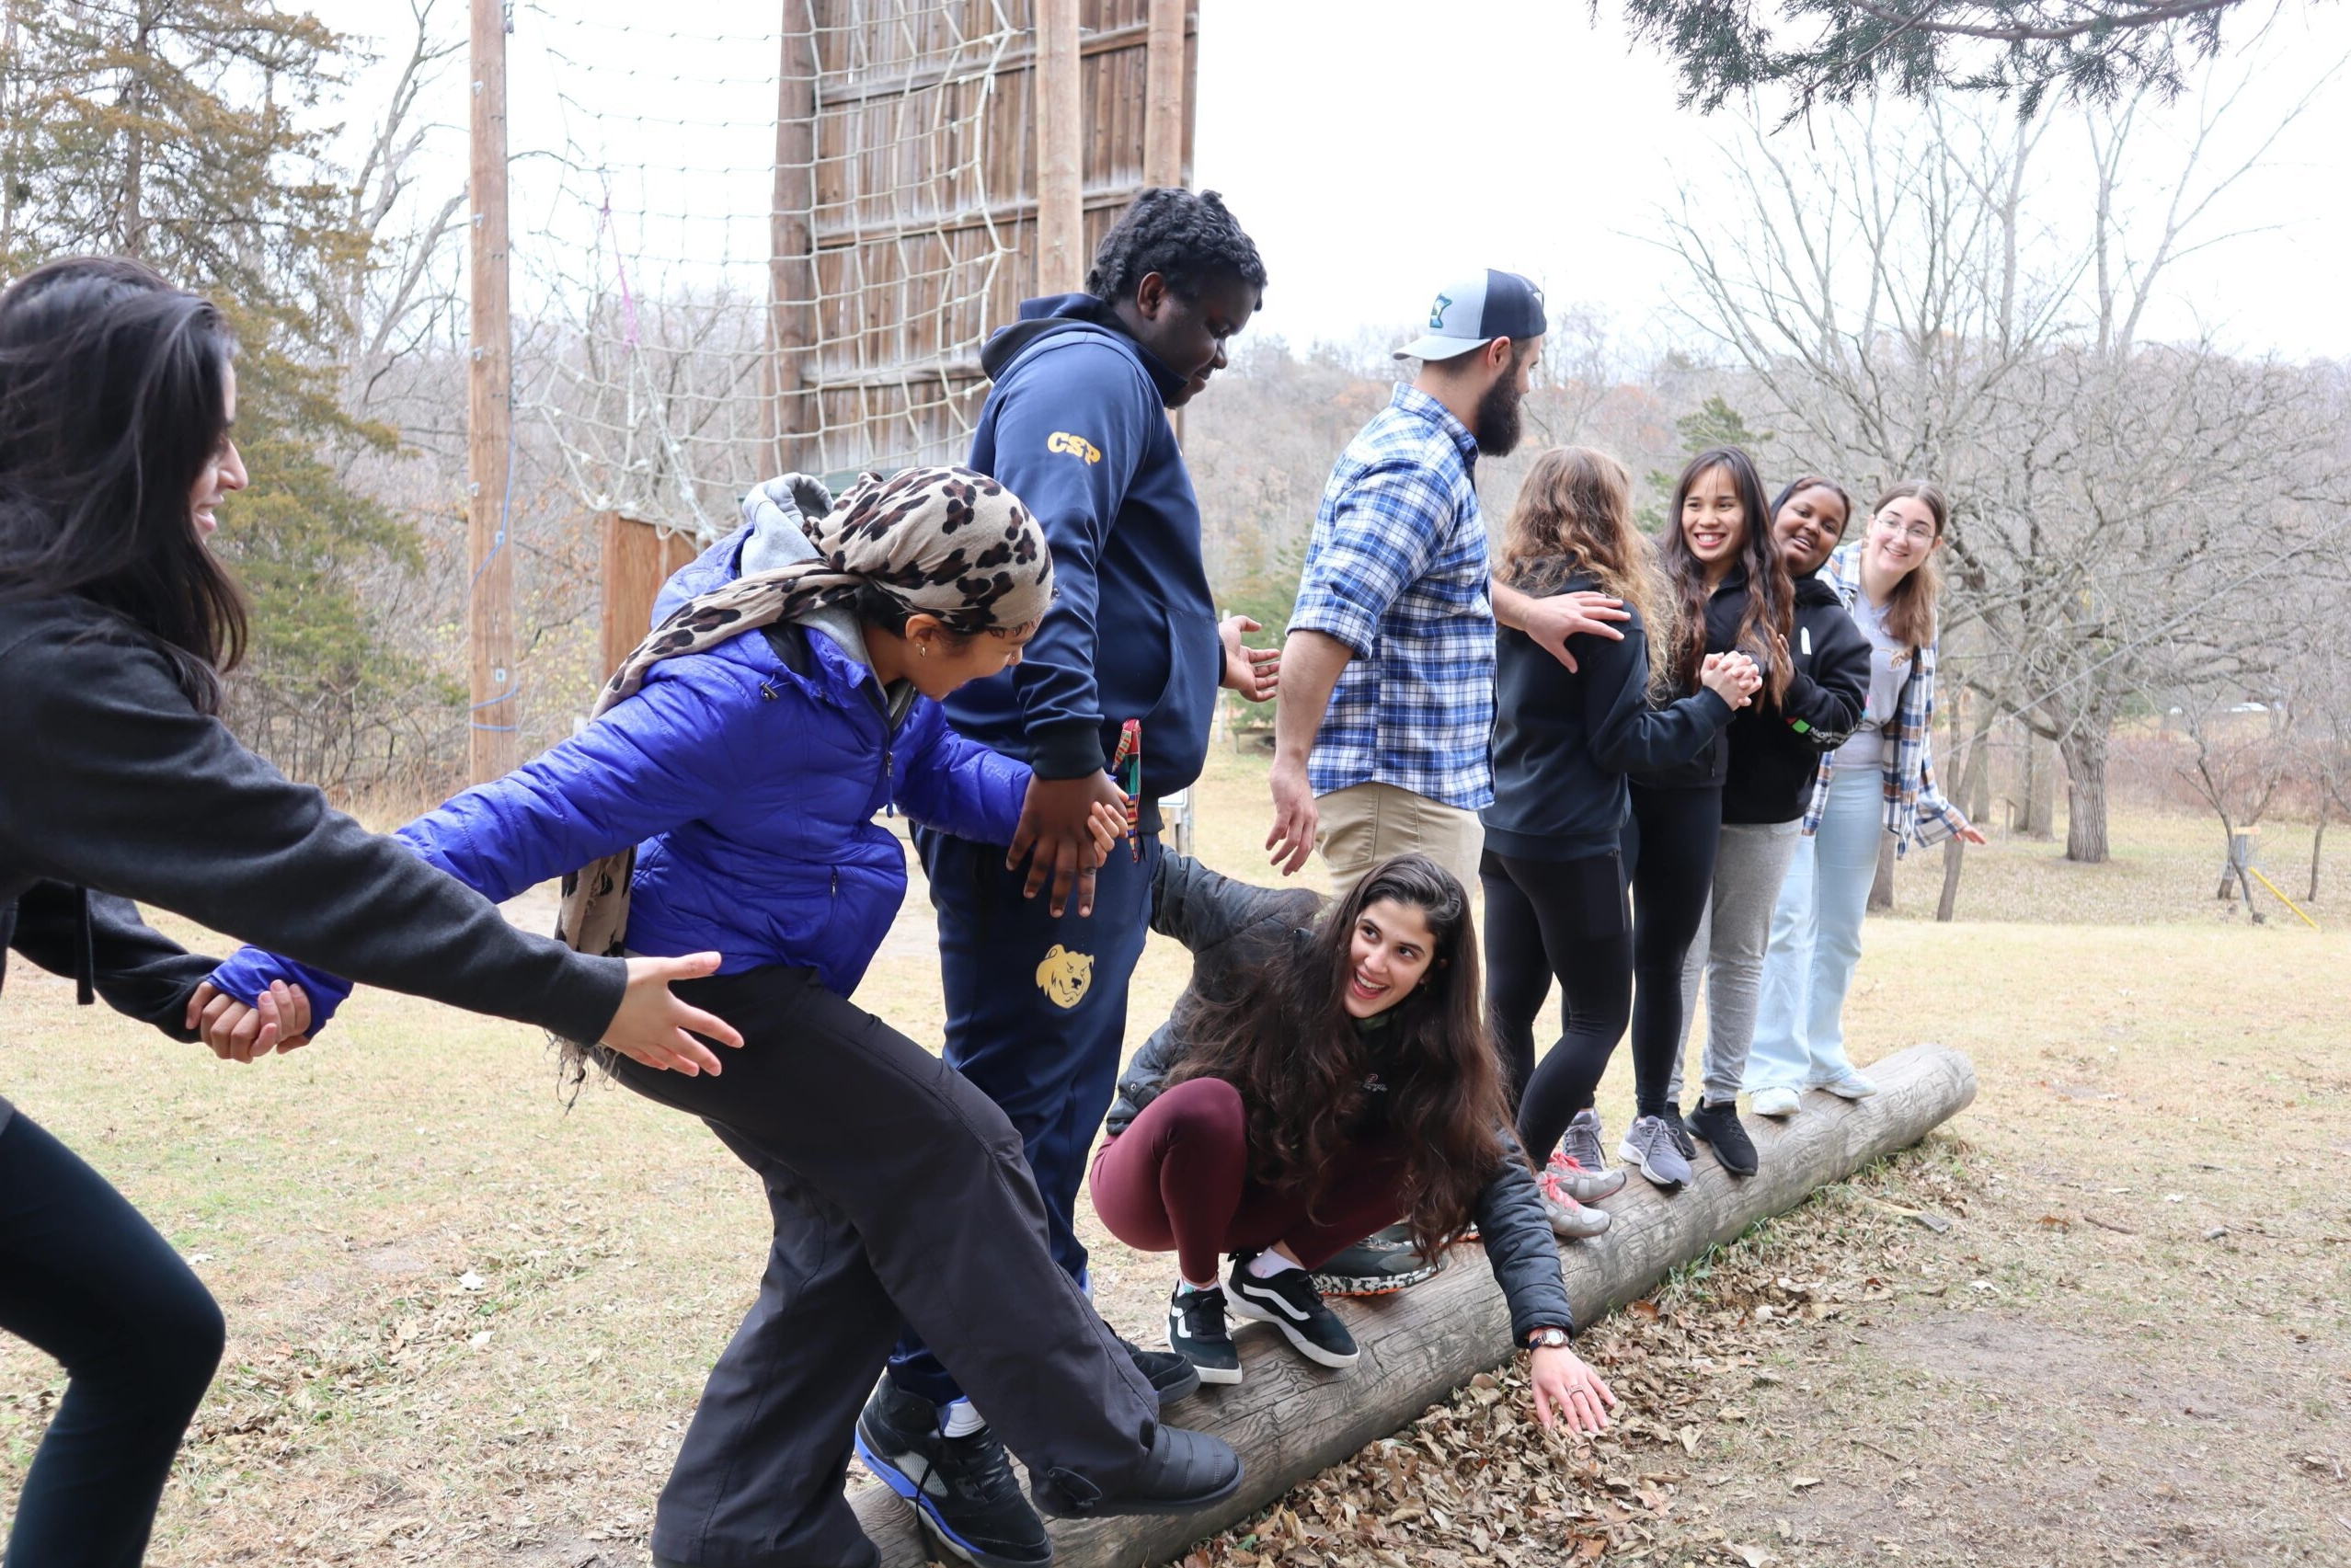 Group of students partaking in a team building activity. All standing on a log holding hands.